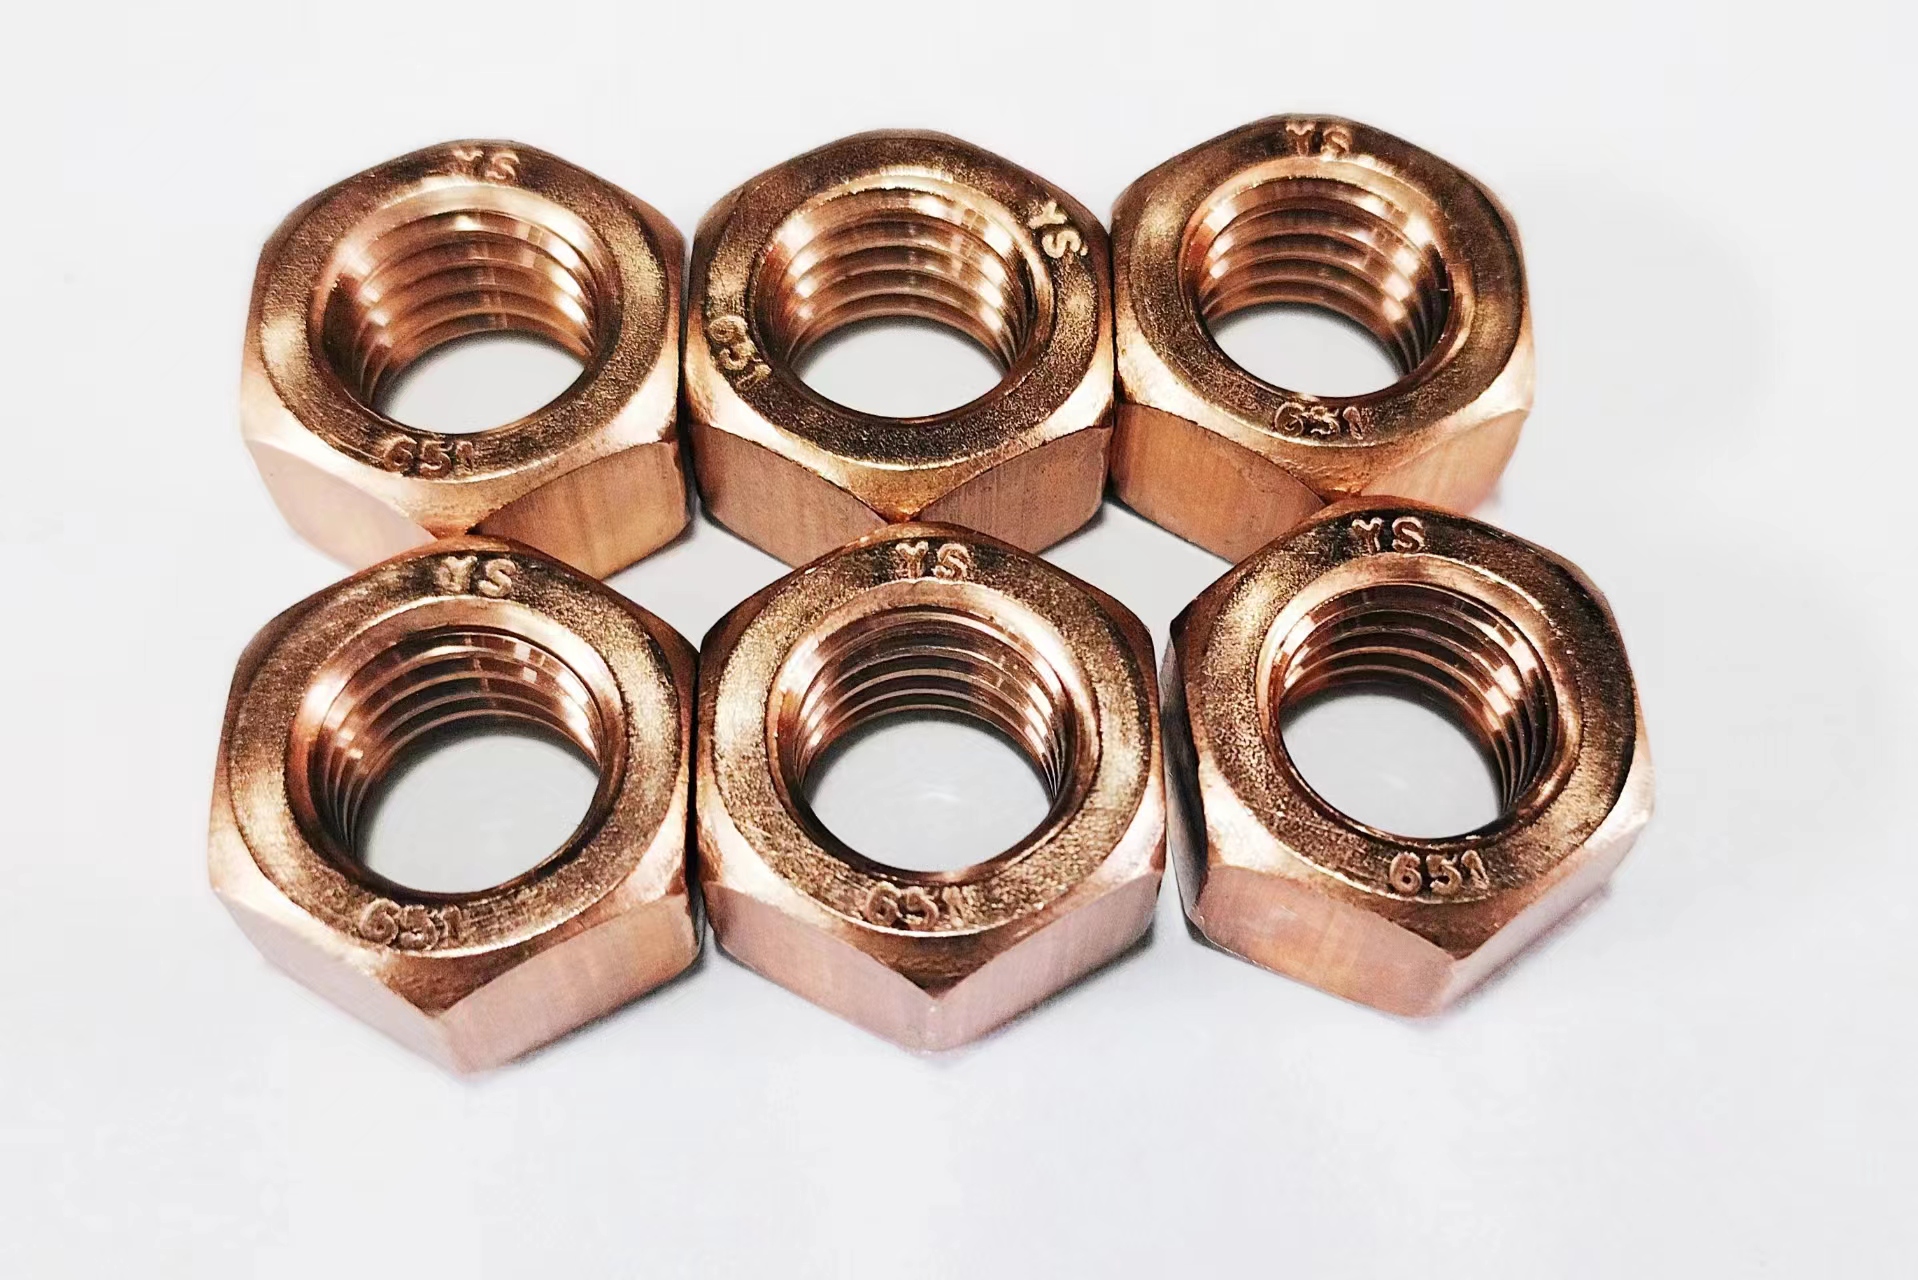 YUSHUNG METAL PRODUCTS CO., LTD. , Silicon bronze full hex nuts 